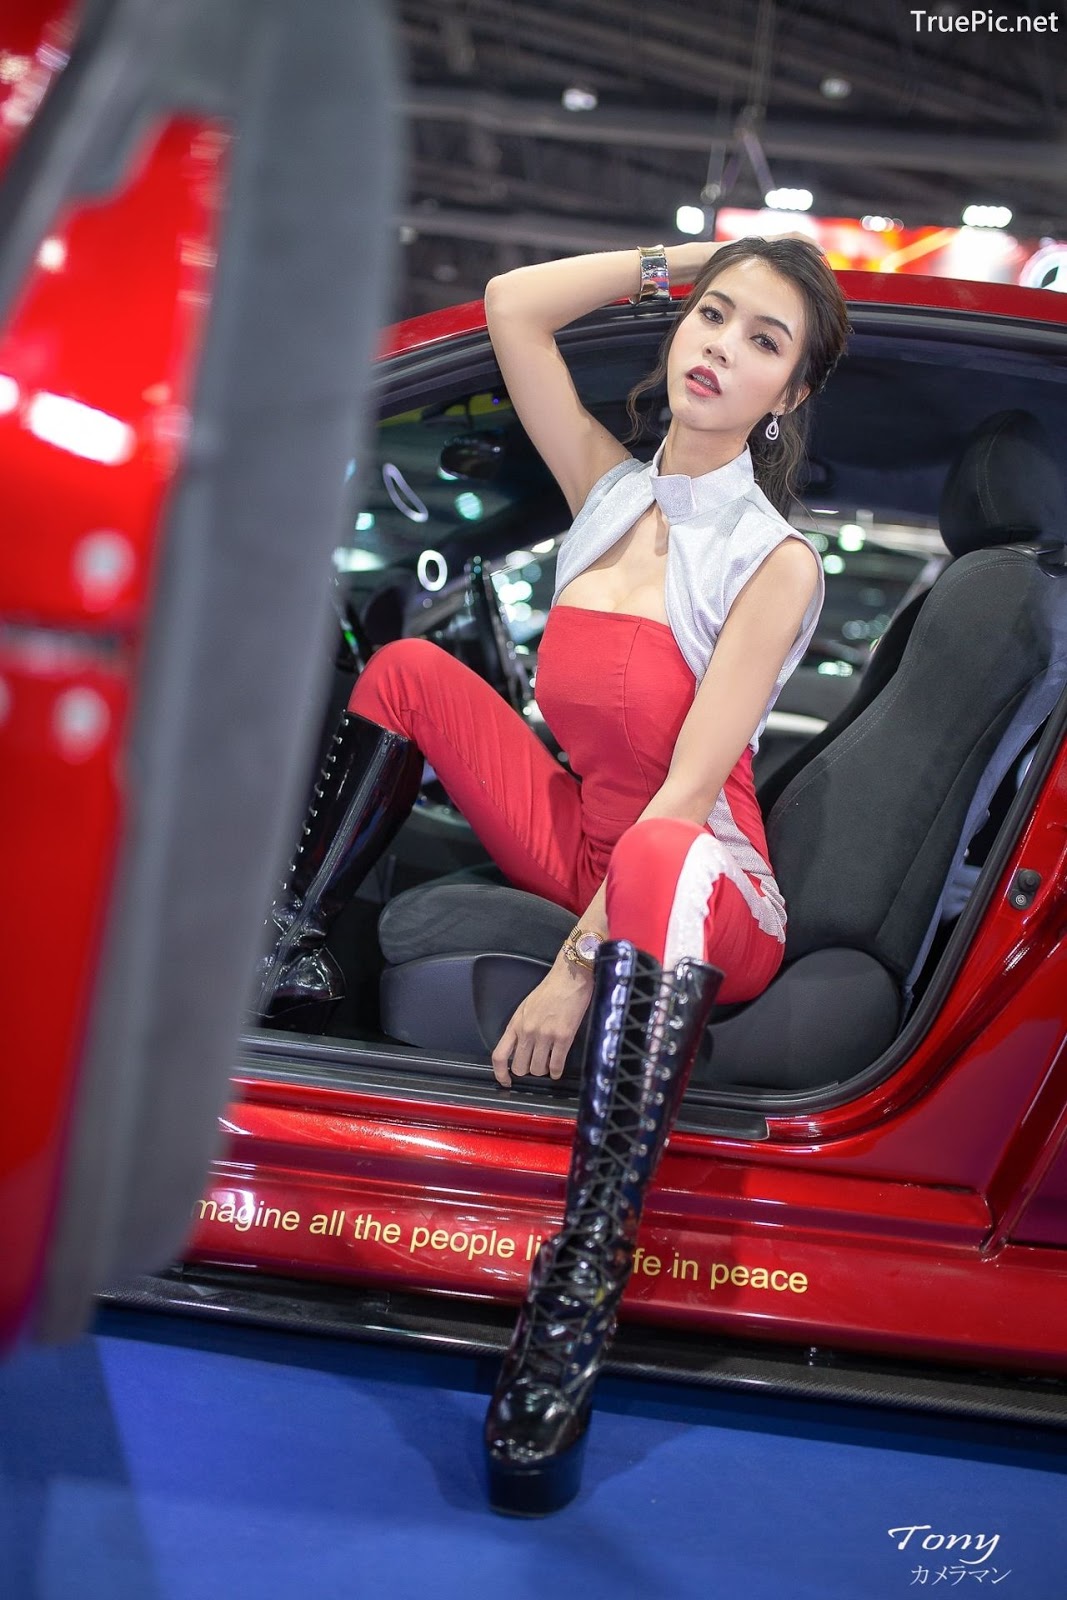 Image-Thailand-Hot-Model-Thai-Racing-Girl-At-Motor-Expo-2019-TruePic.net- Picture-45